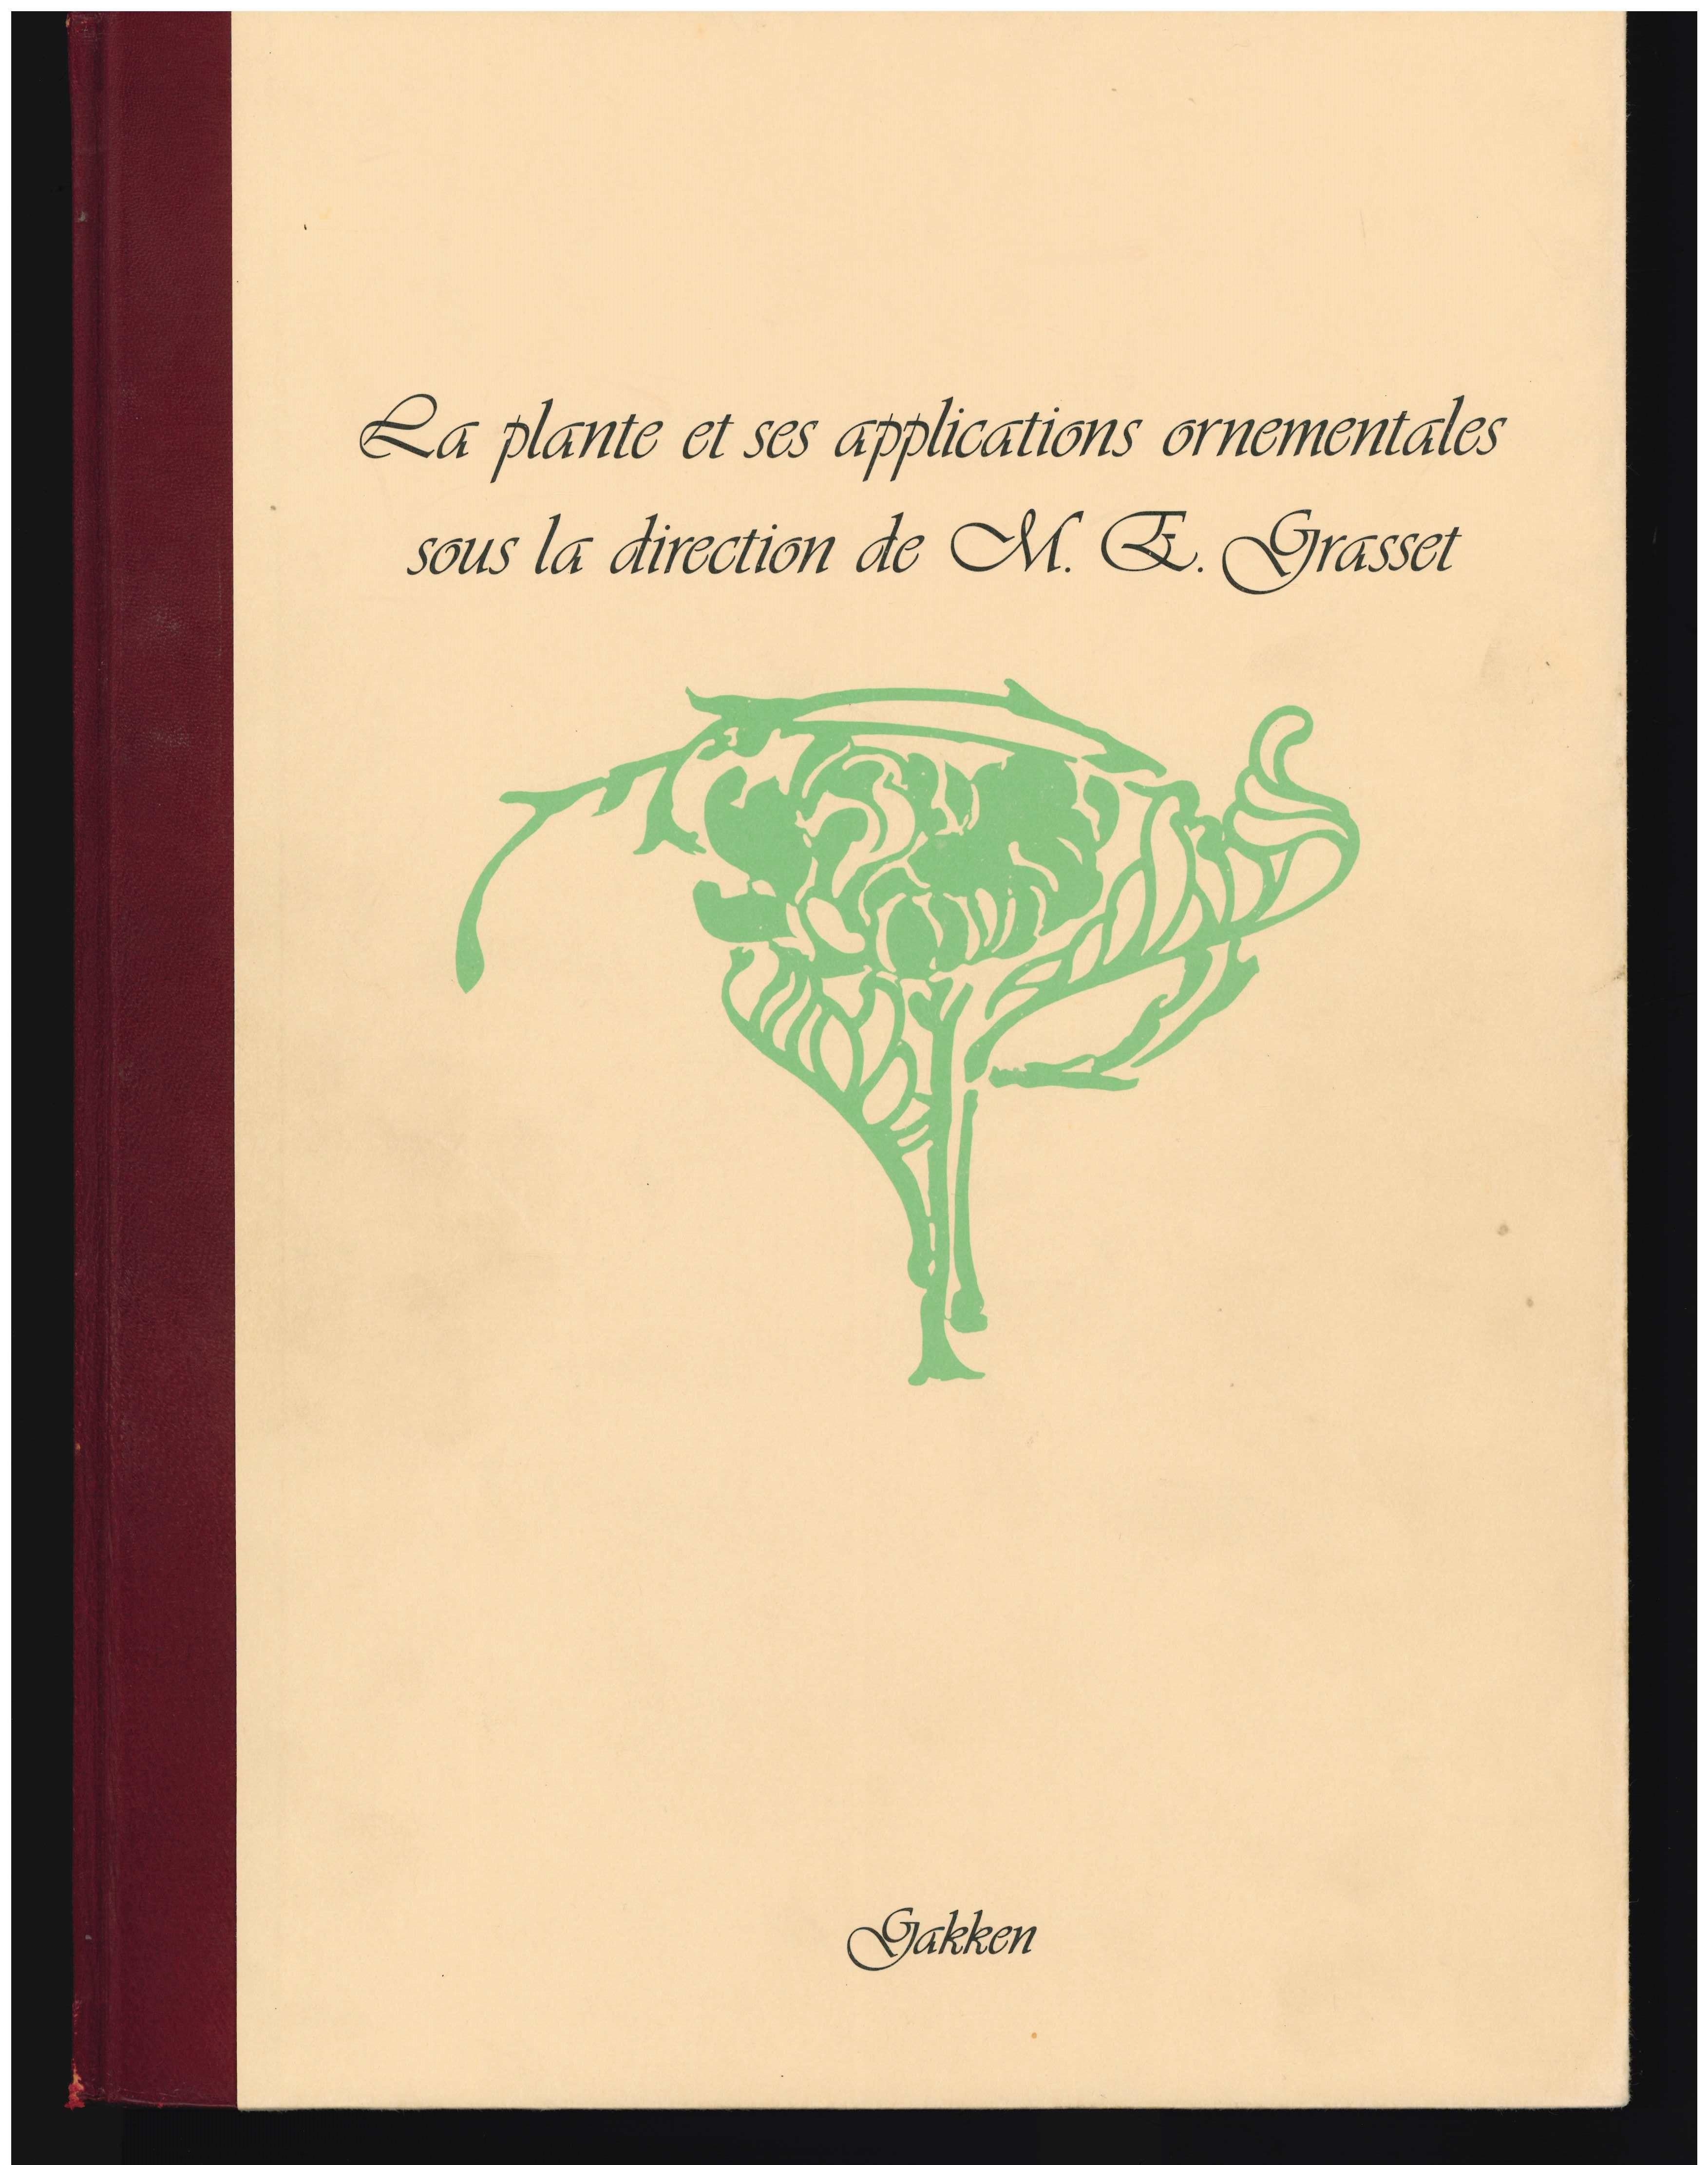 This is a 2 volume box set of books, the individual titles of which are - La Plante et ses applications ornementales sous la direction by M.E.Grasset and Les Fleurs et leurs applications decoratives by E.A.Seguy. Both volumes are beautifully